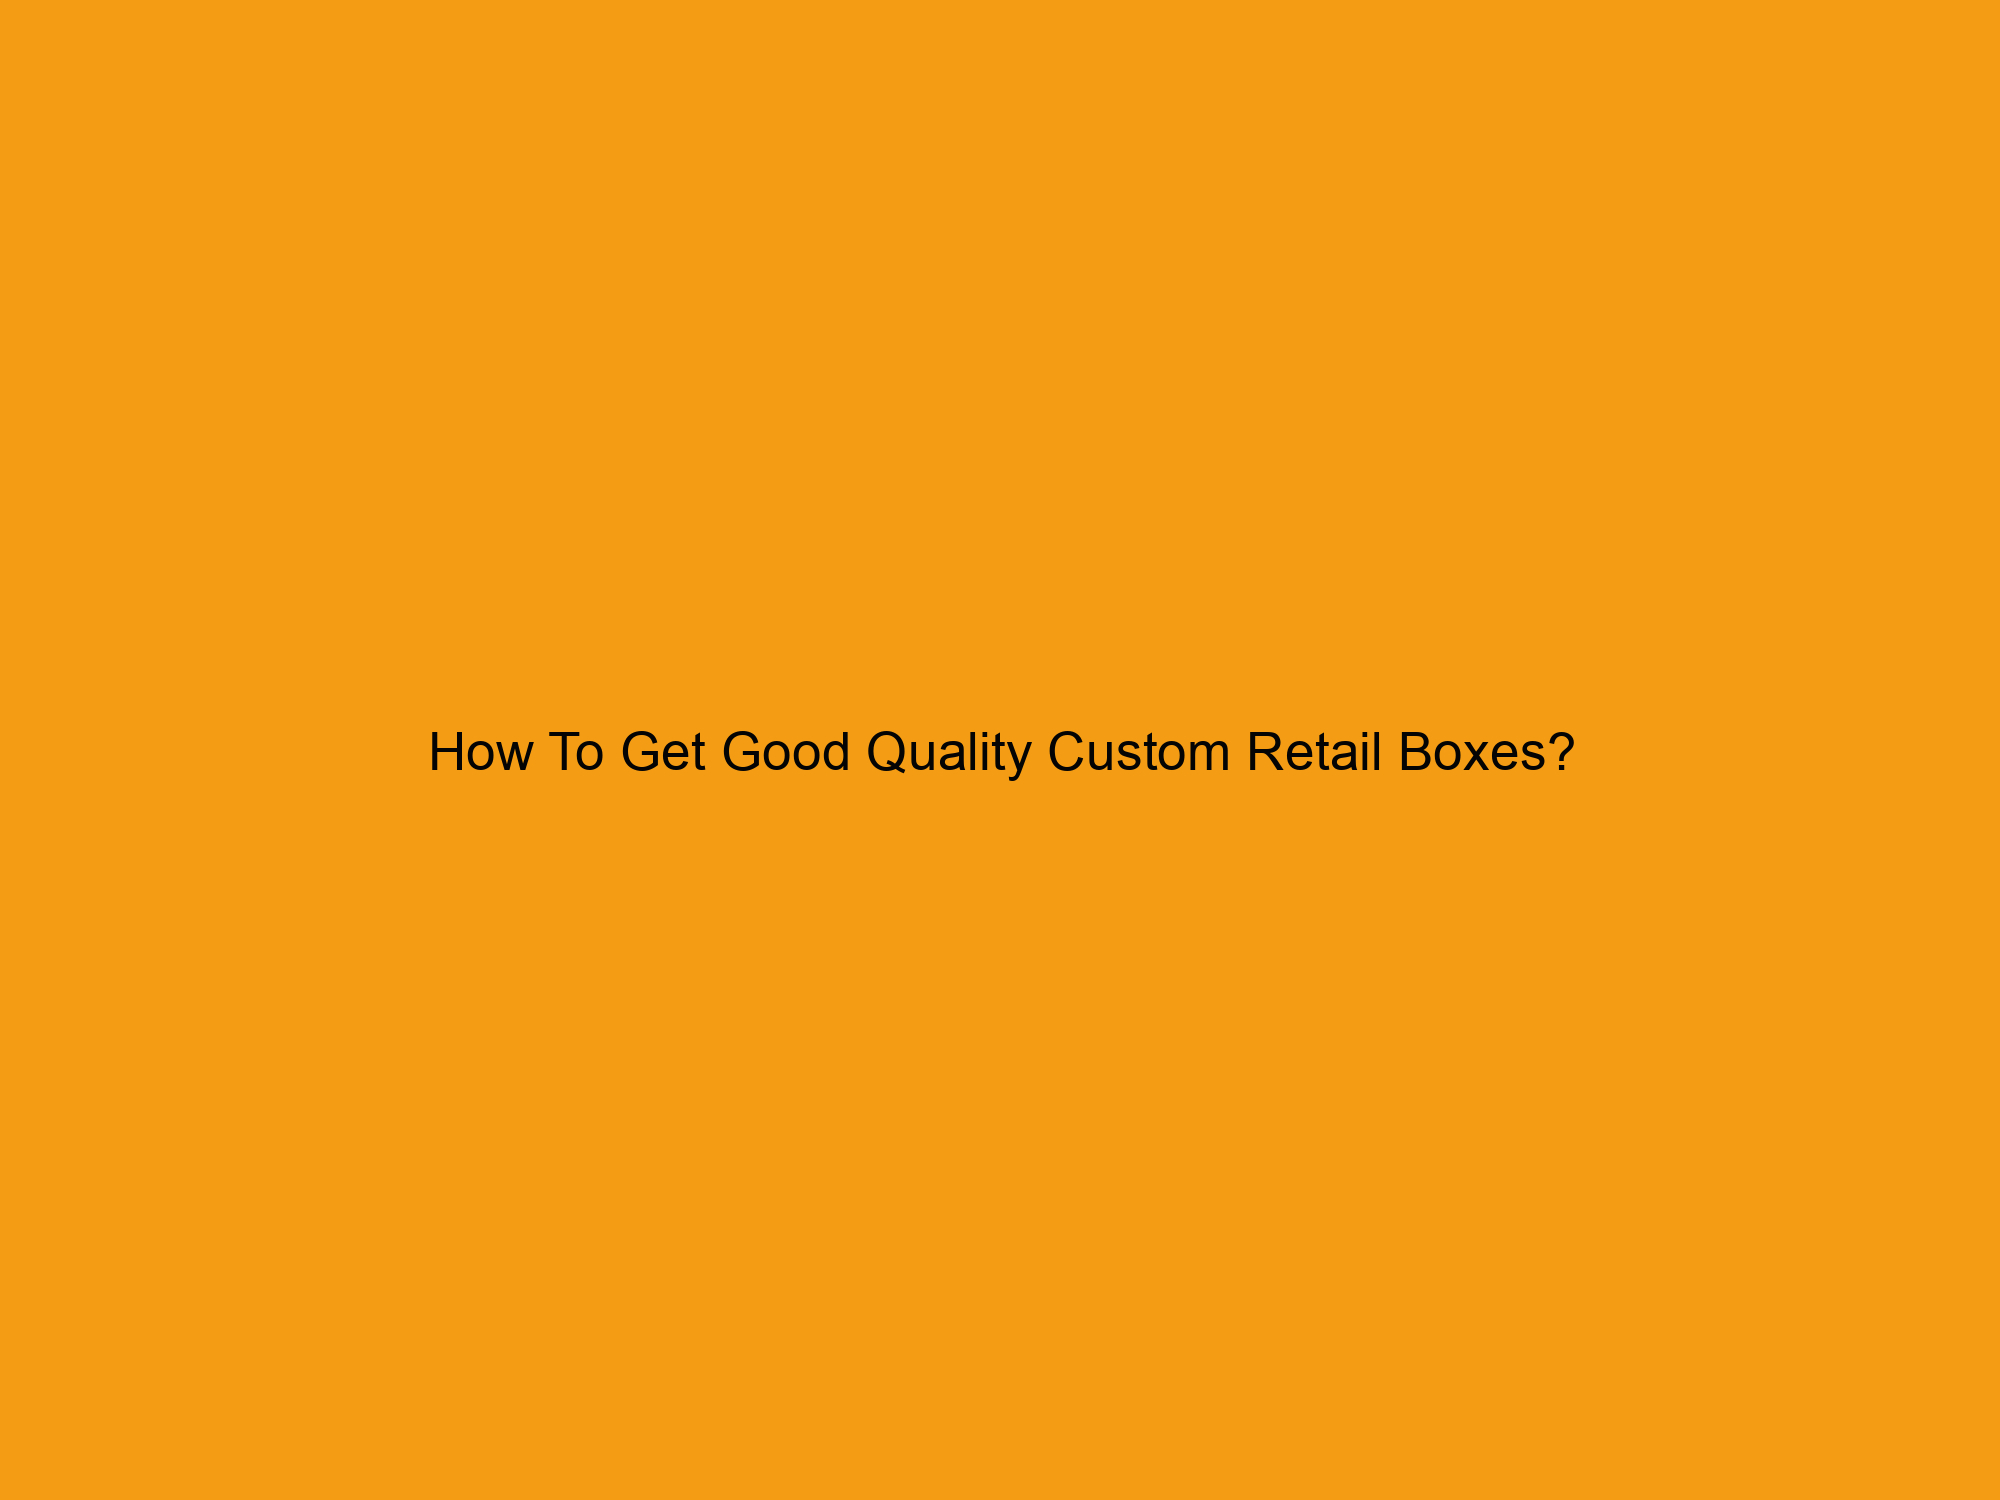 How To Get Good Quality Custom Retail Boxes?